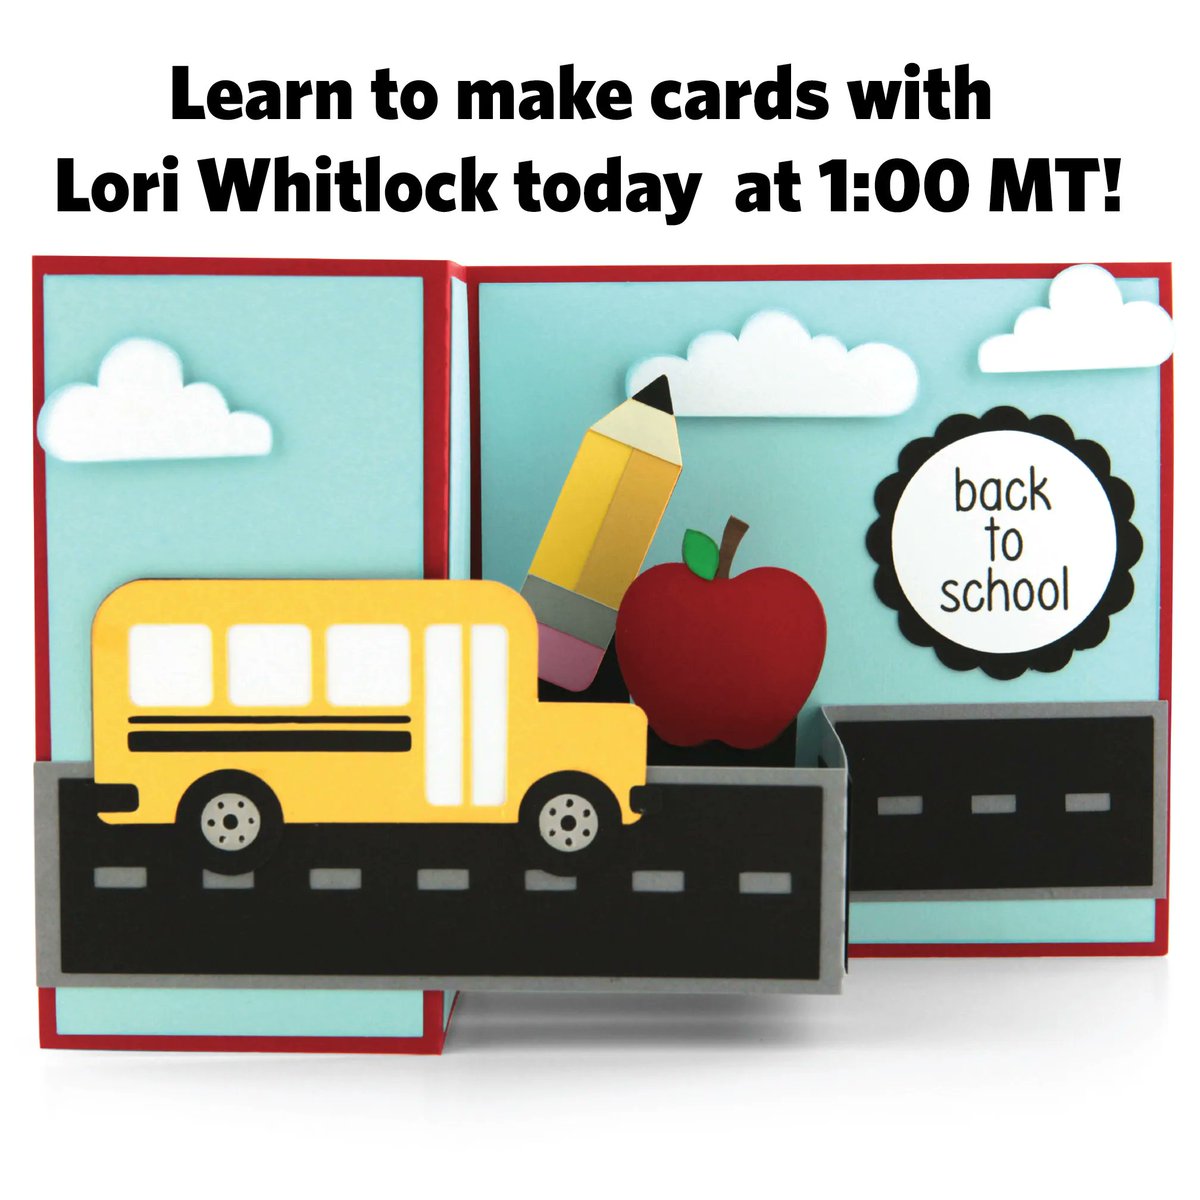 Come learn how to make a card with Lori Whitlock today at 1:00 MT! If you can't make it, sign up anyways so you can get a live recording of the class to watch at a better time. Click here to save your spot! buff.ly/3rvonch